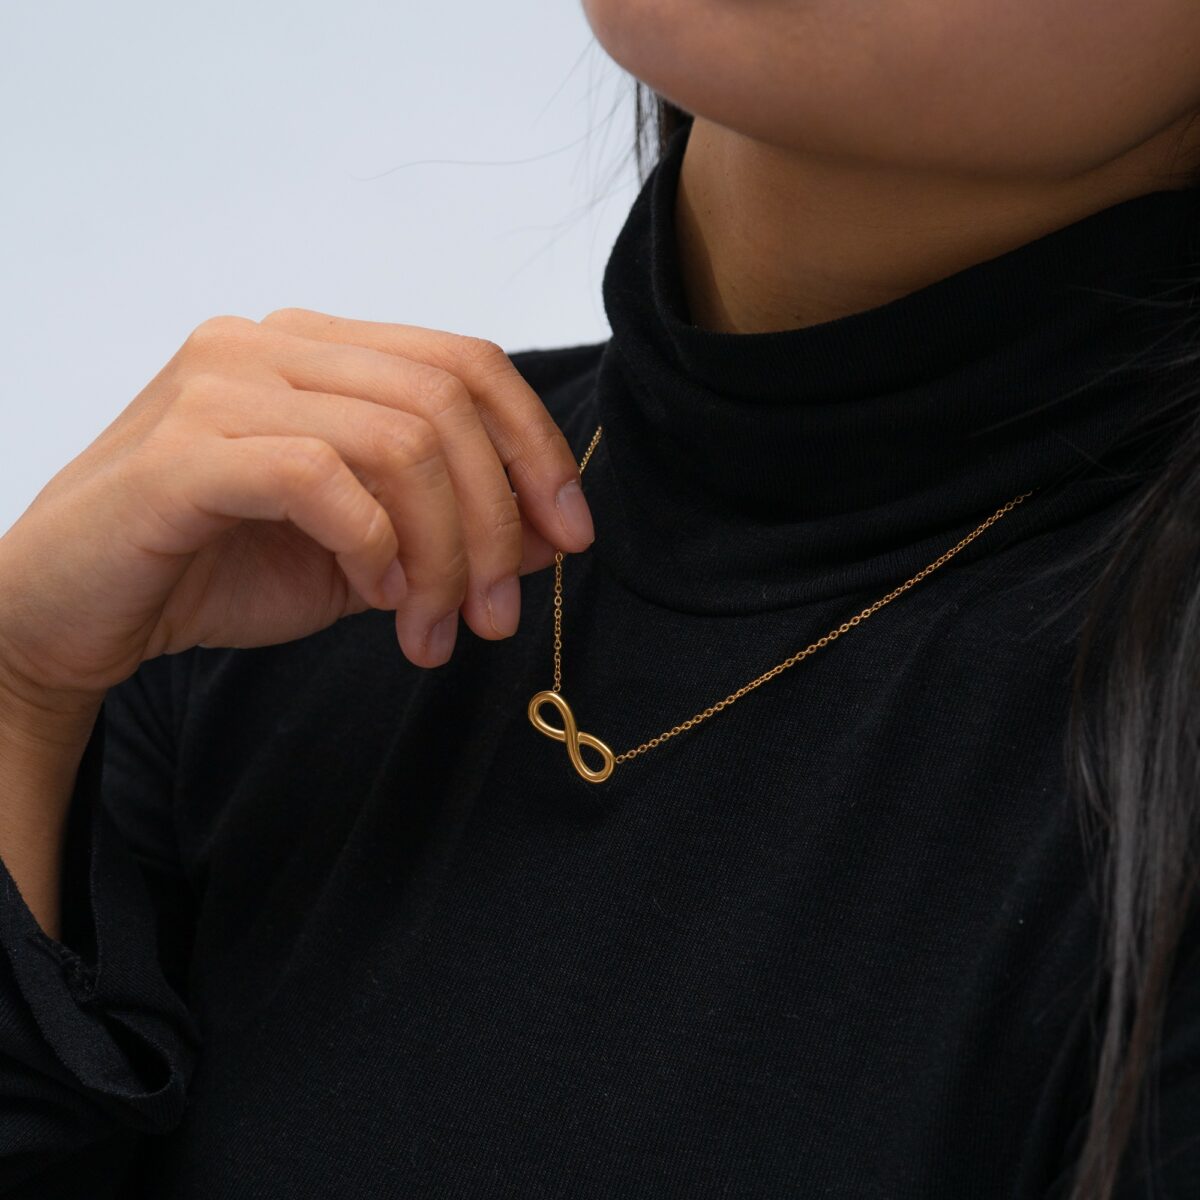 https://m.clubbella.co/product/infinity-gold-necklace/ DSC06607-1